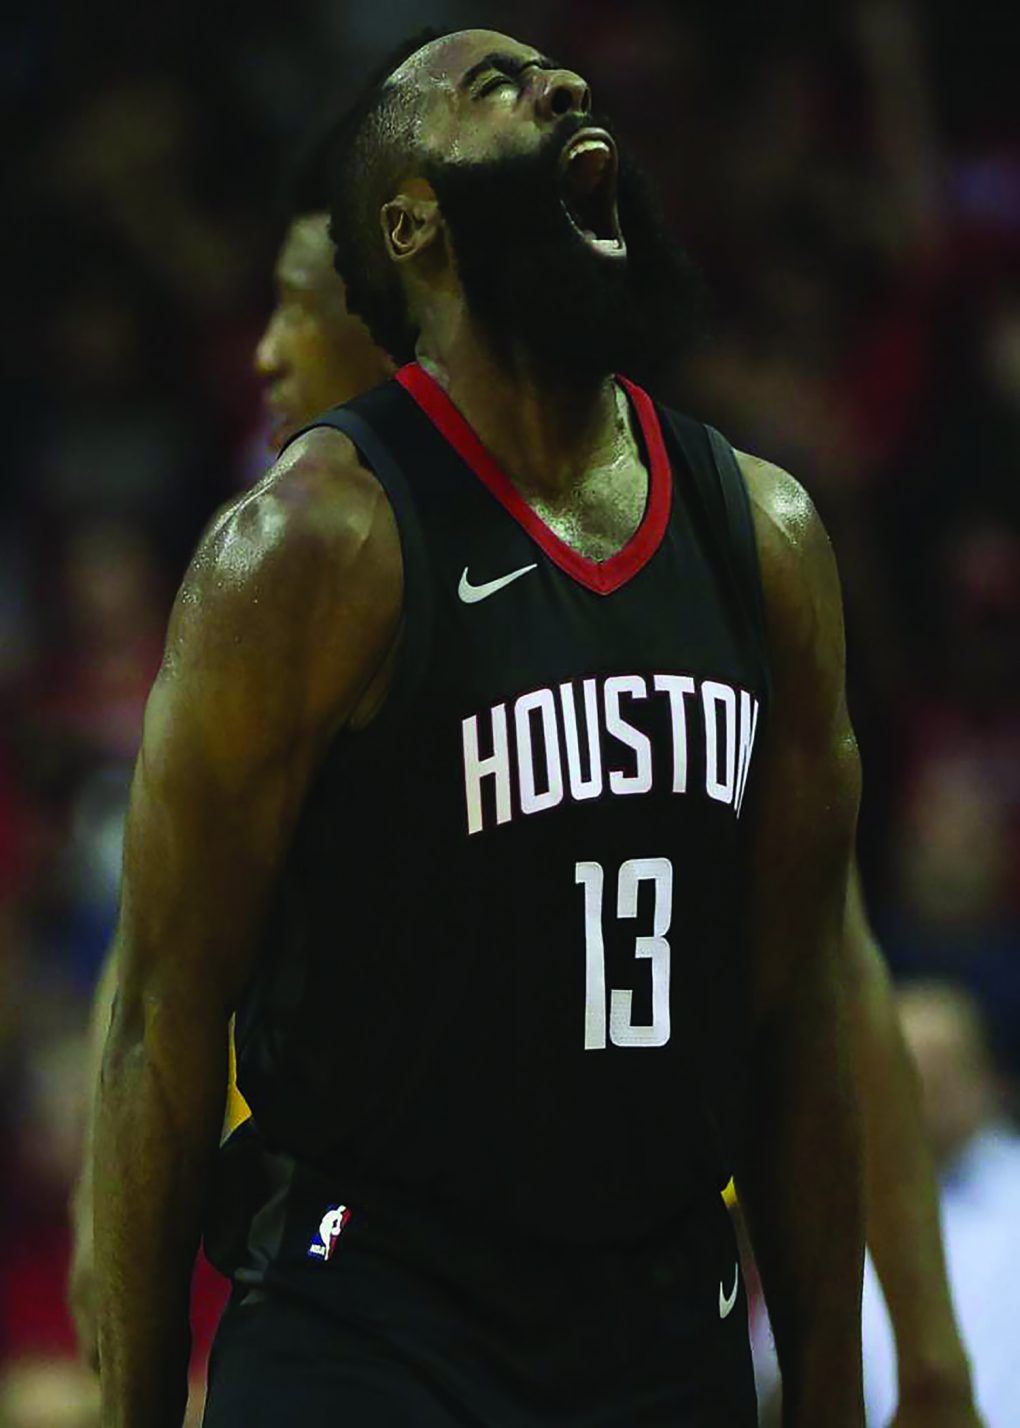 Rockets+blast+off+to+top+of+NBA